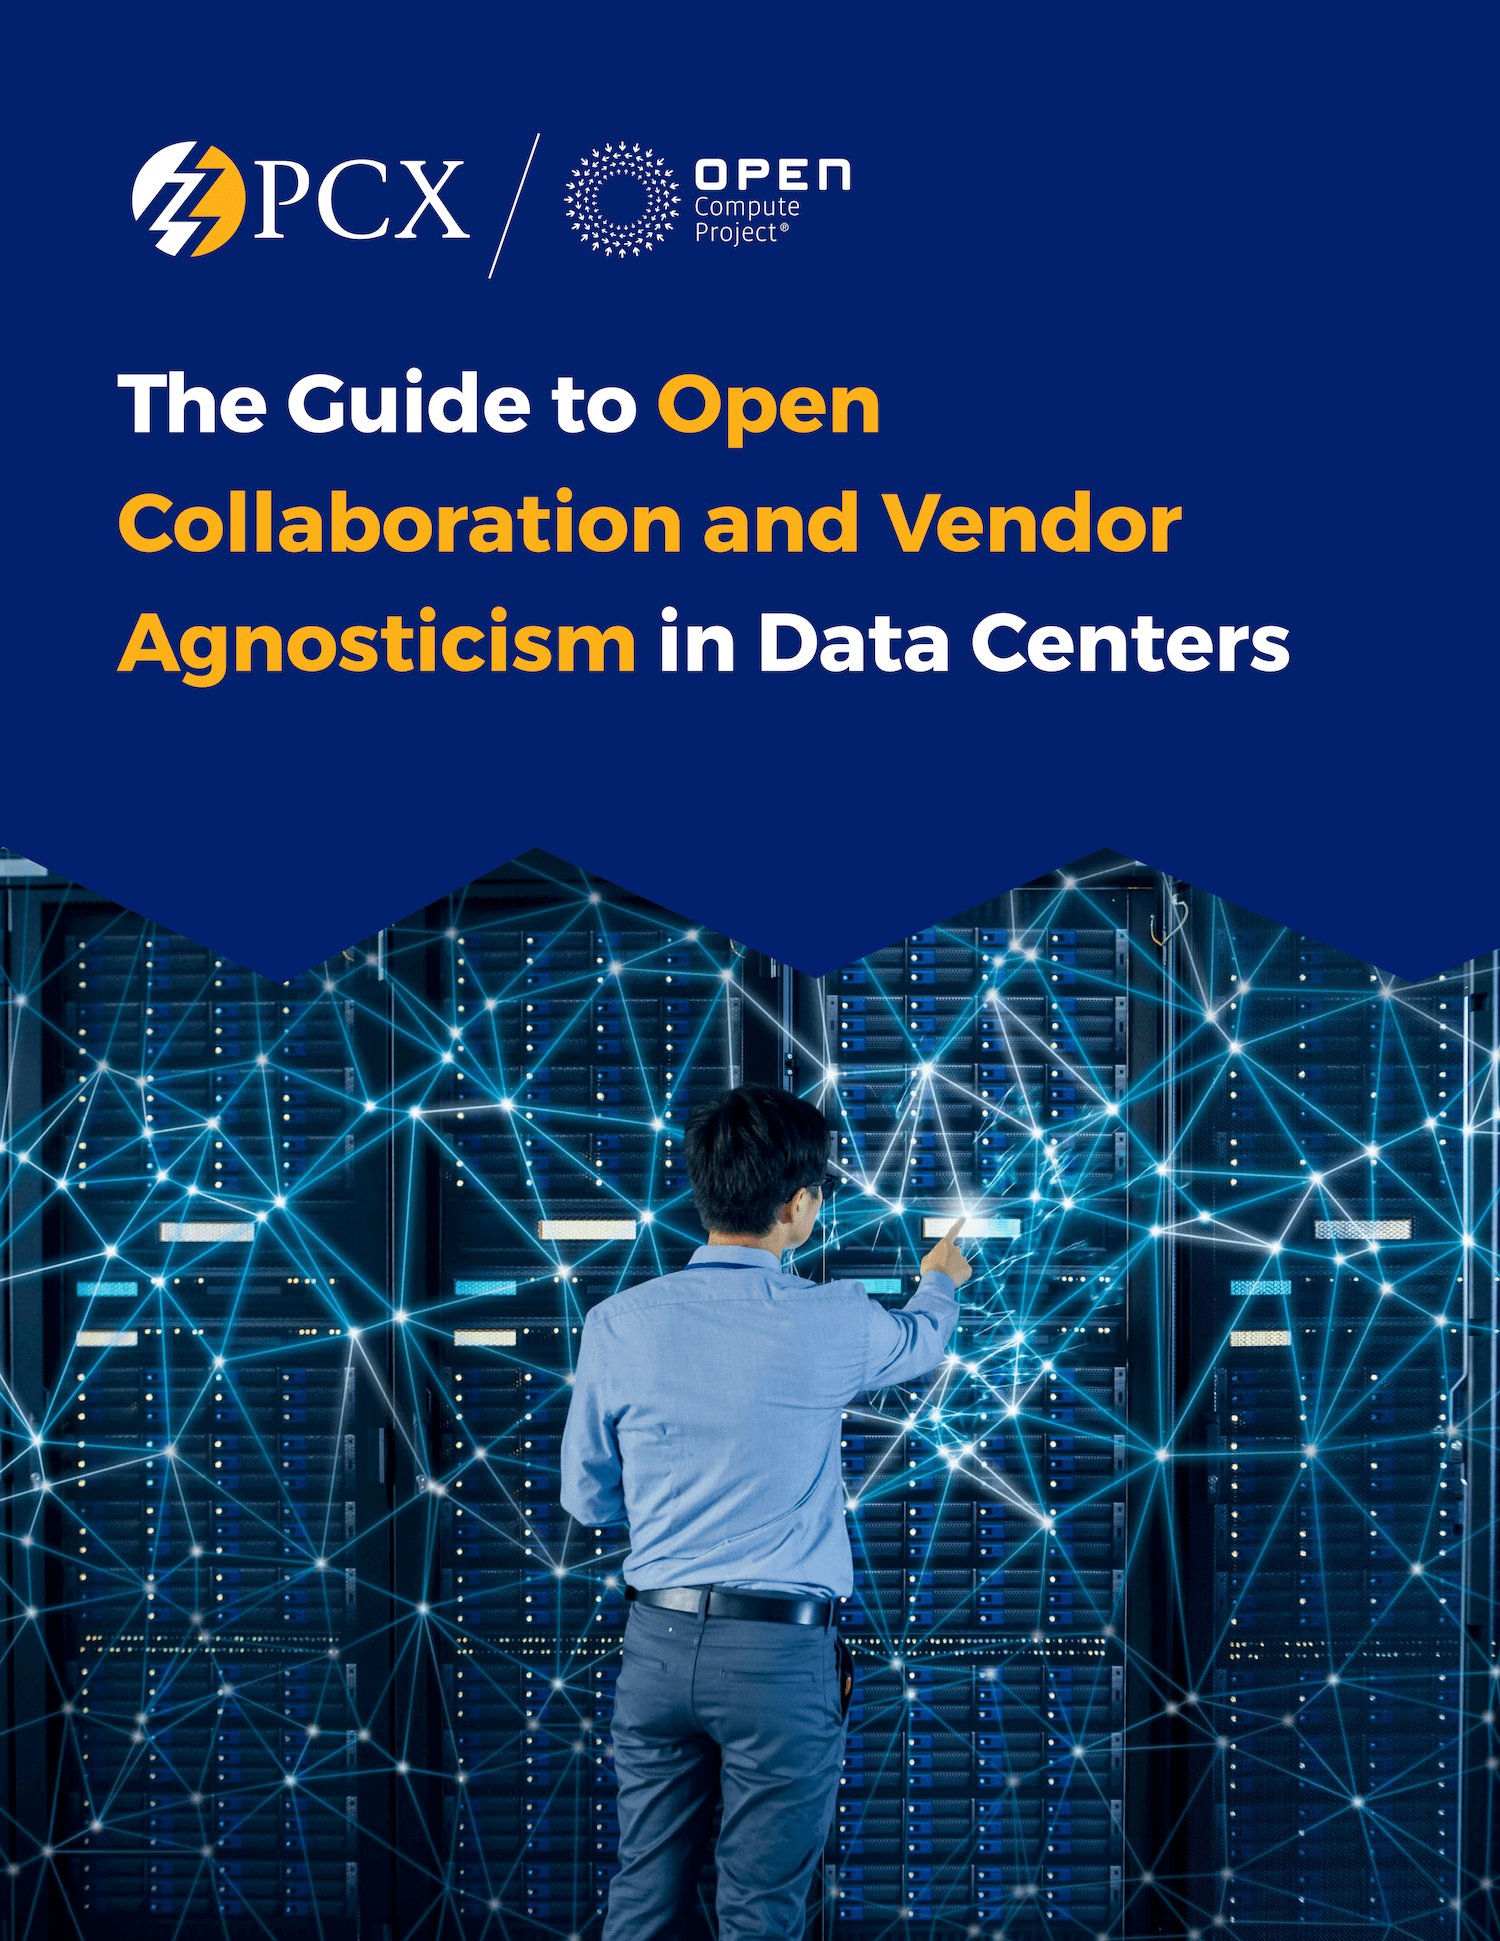 The Guide to Open Collaboration and Vendor Agnosticism in Data Centers